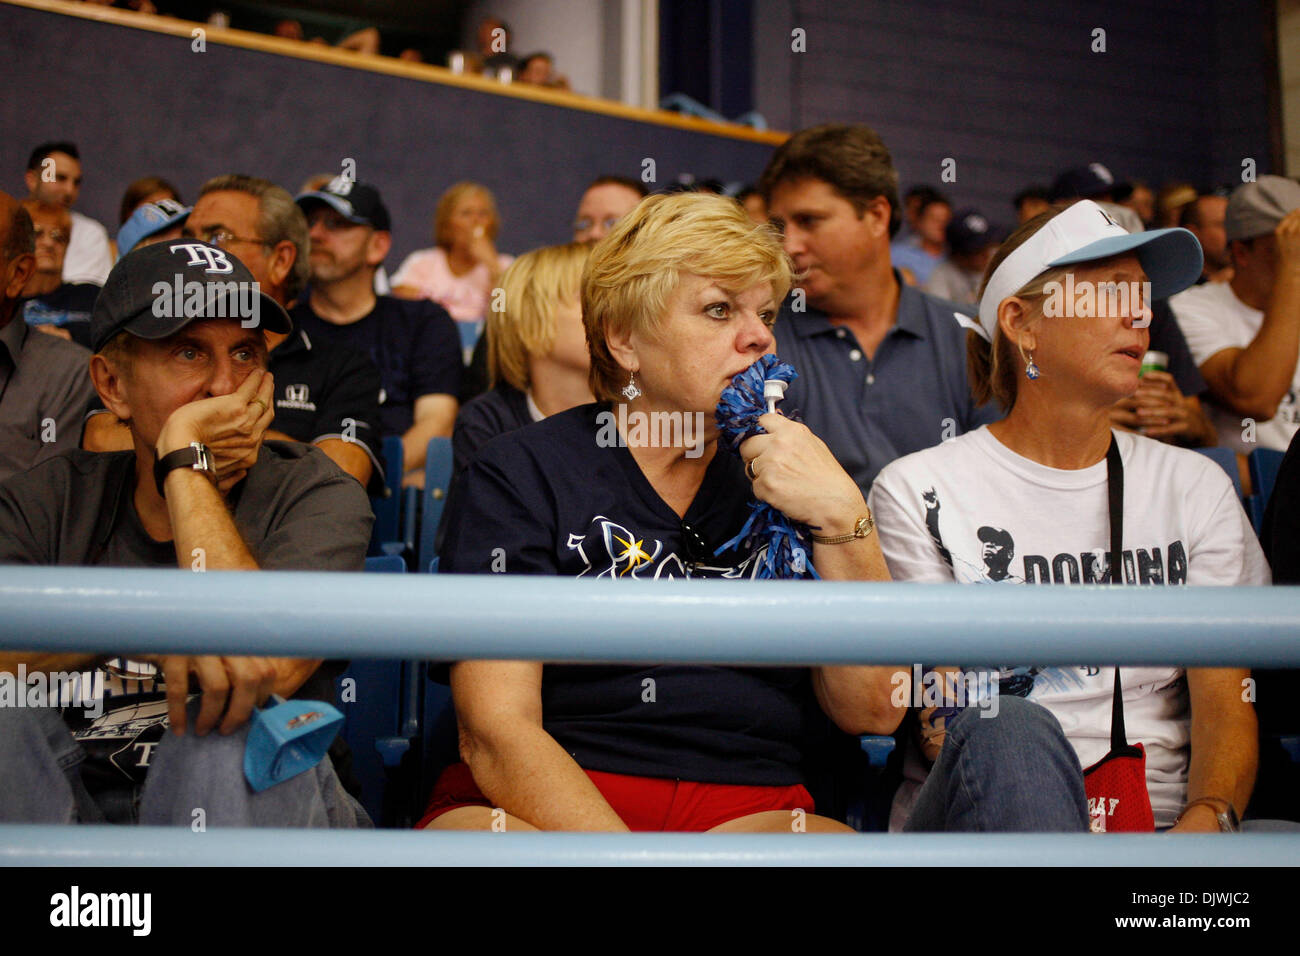 Oct. 7, 2010 - St. Petersburg - CHRIS ZUPPA   |   Times.SP 329225 ZUPP Rays 12.(St. Petersburg, 10/07/2010) (left to right) Tampa Bay Rays fans Frank Casorio of St. Pete Beach, his wife, Dianne Casorio of St. Pete Beach and her friend, Debbie Haynes of Gulfport react to the end of the sixth inning. Tampa Bay Rays play the Texas Rangers for game two of the ALDS at Tropicana Field. [ Stock Photo